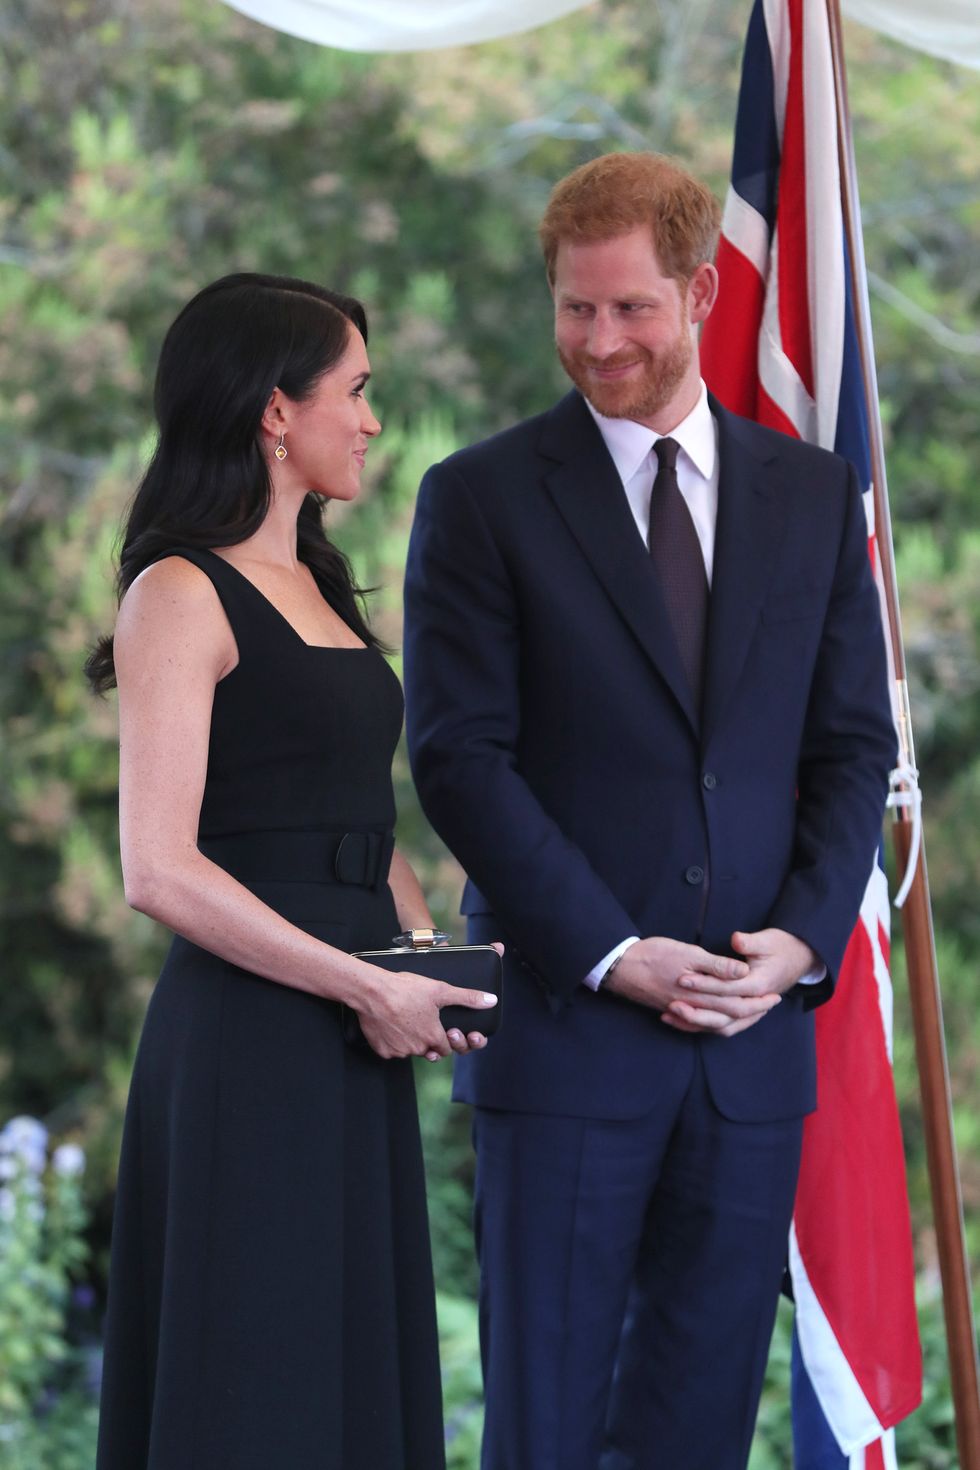 DuchessMeghan - Prince Harry - Meghan Markle -  Duke and Duchess of Sussex - Discussion  - Page 23 Hbz-prince-harry-meghan-markle-ireland-gettyimages-995588332-1531258394